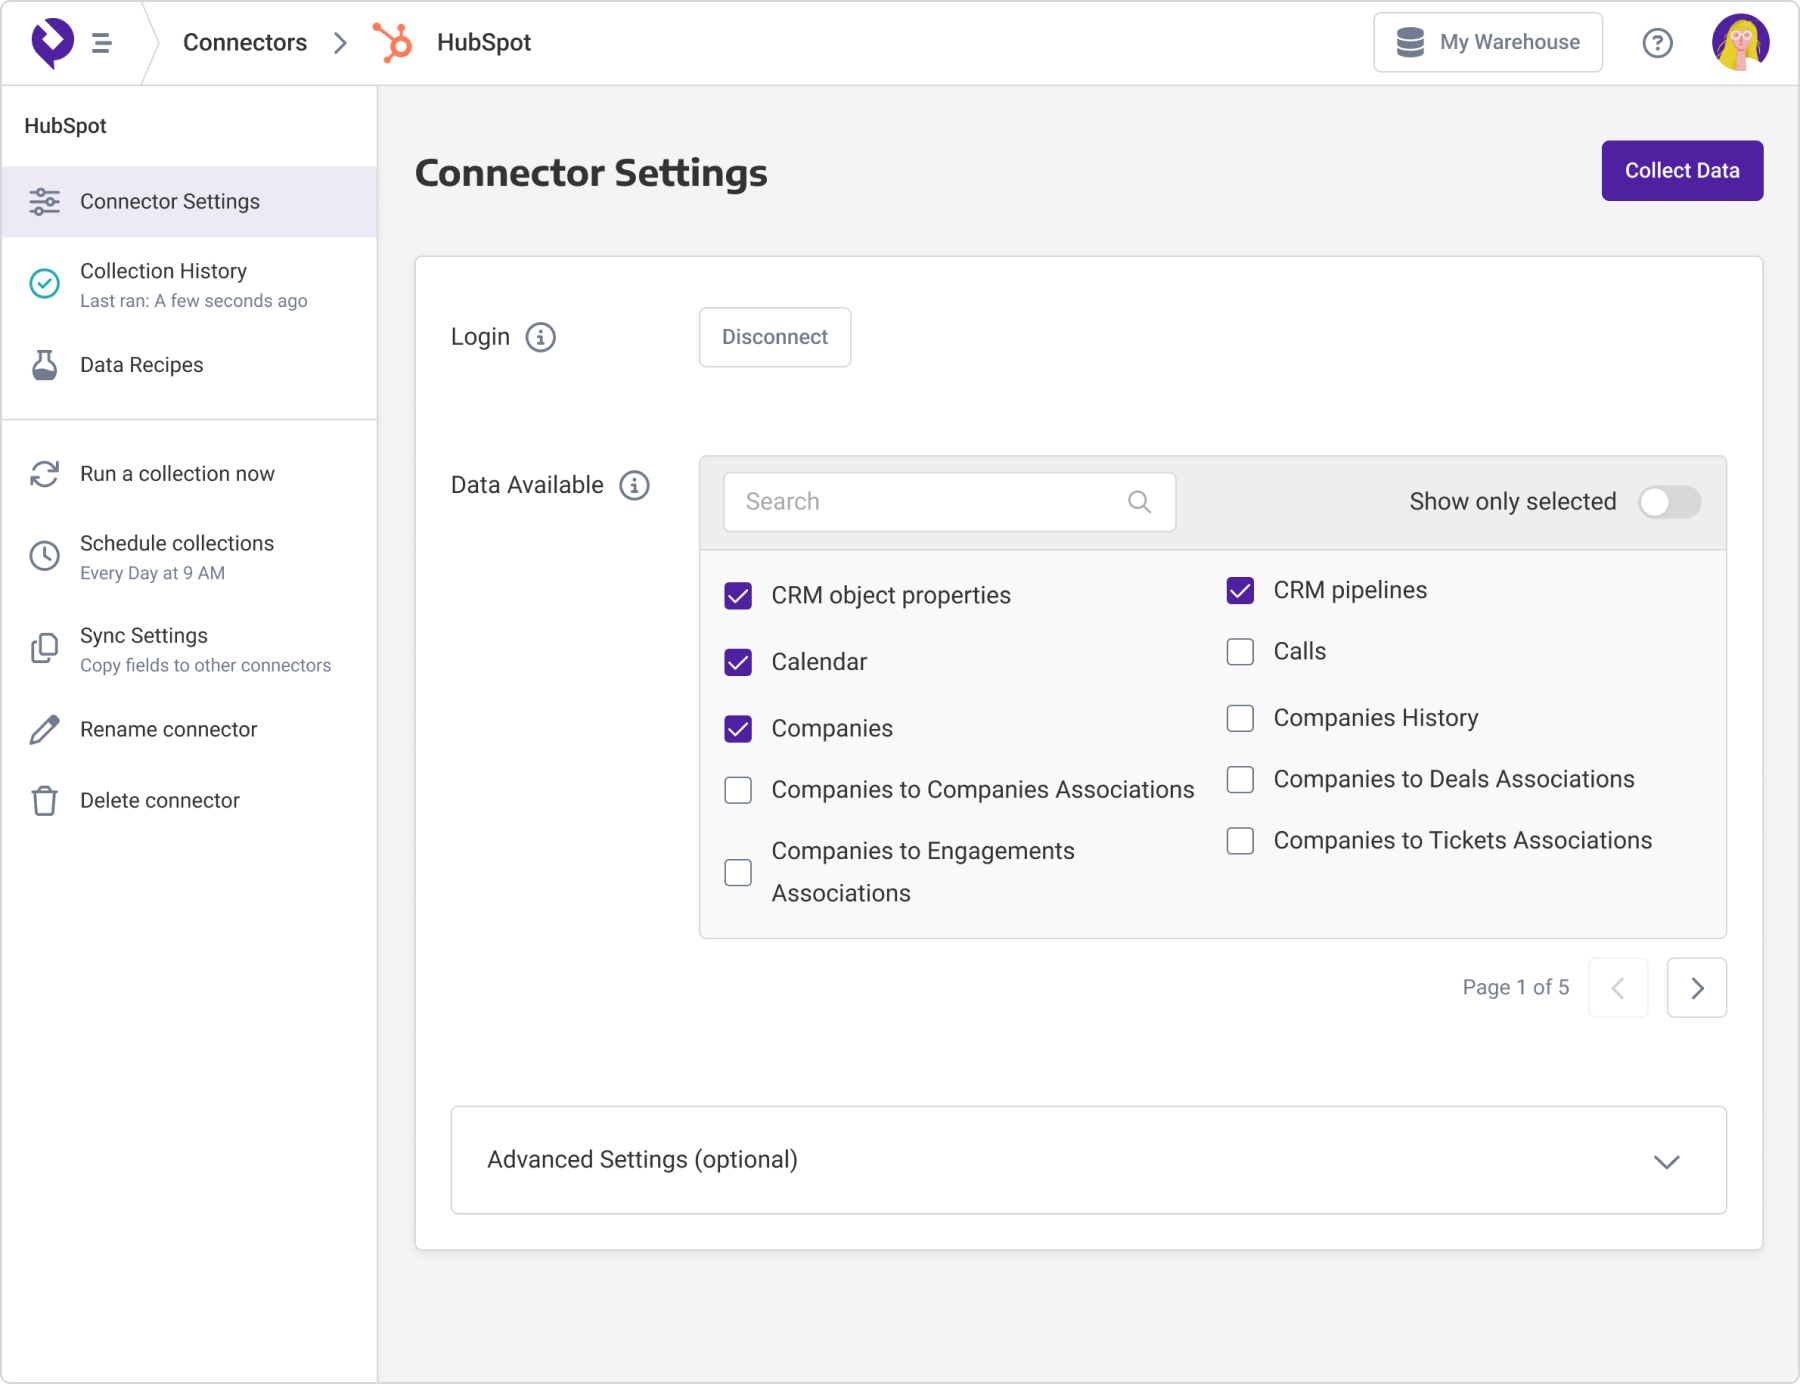 Your data source settings